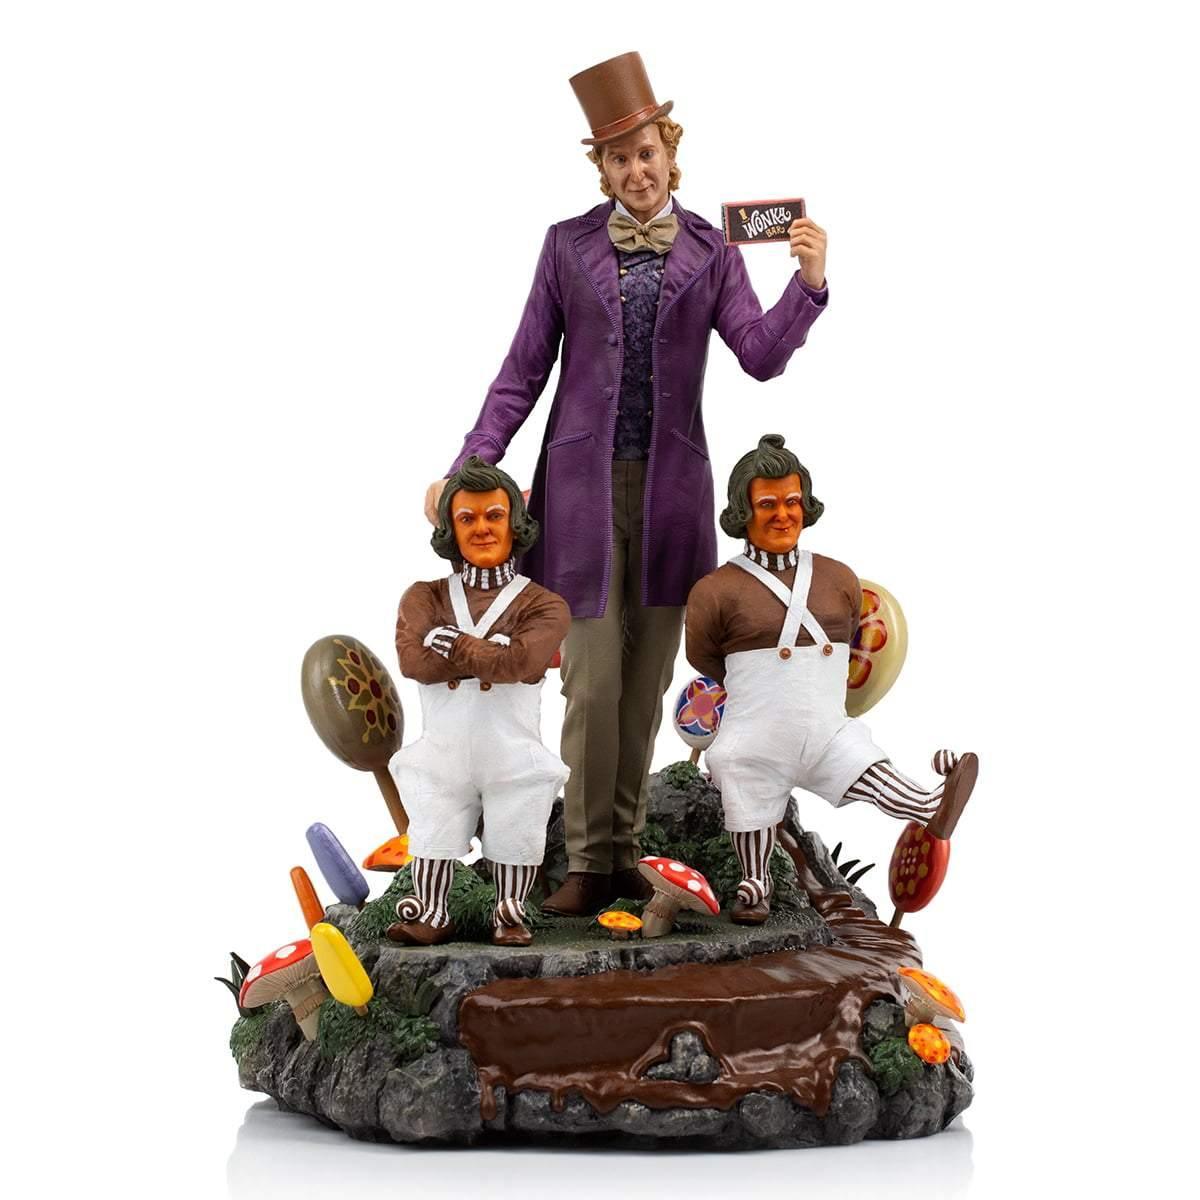 IRO34911 Willy Wonka and the Chocolate Factory - Willy Wonka Deluxe 1:10 Scale Statue - Iron Studios - Titan Pop Culture